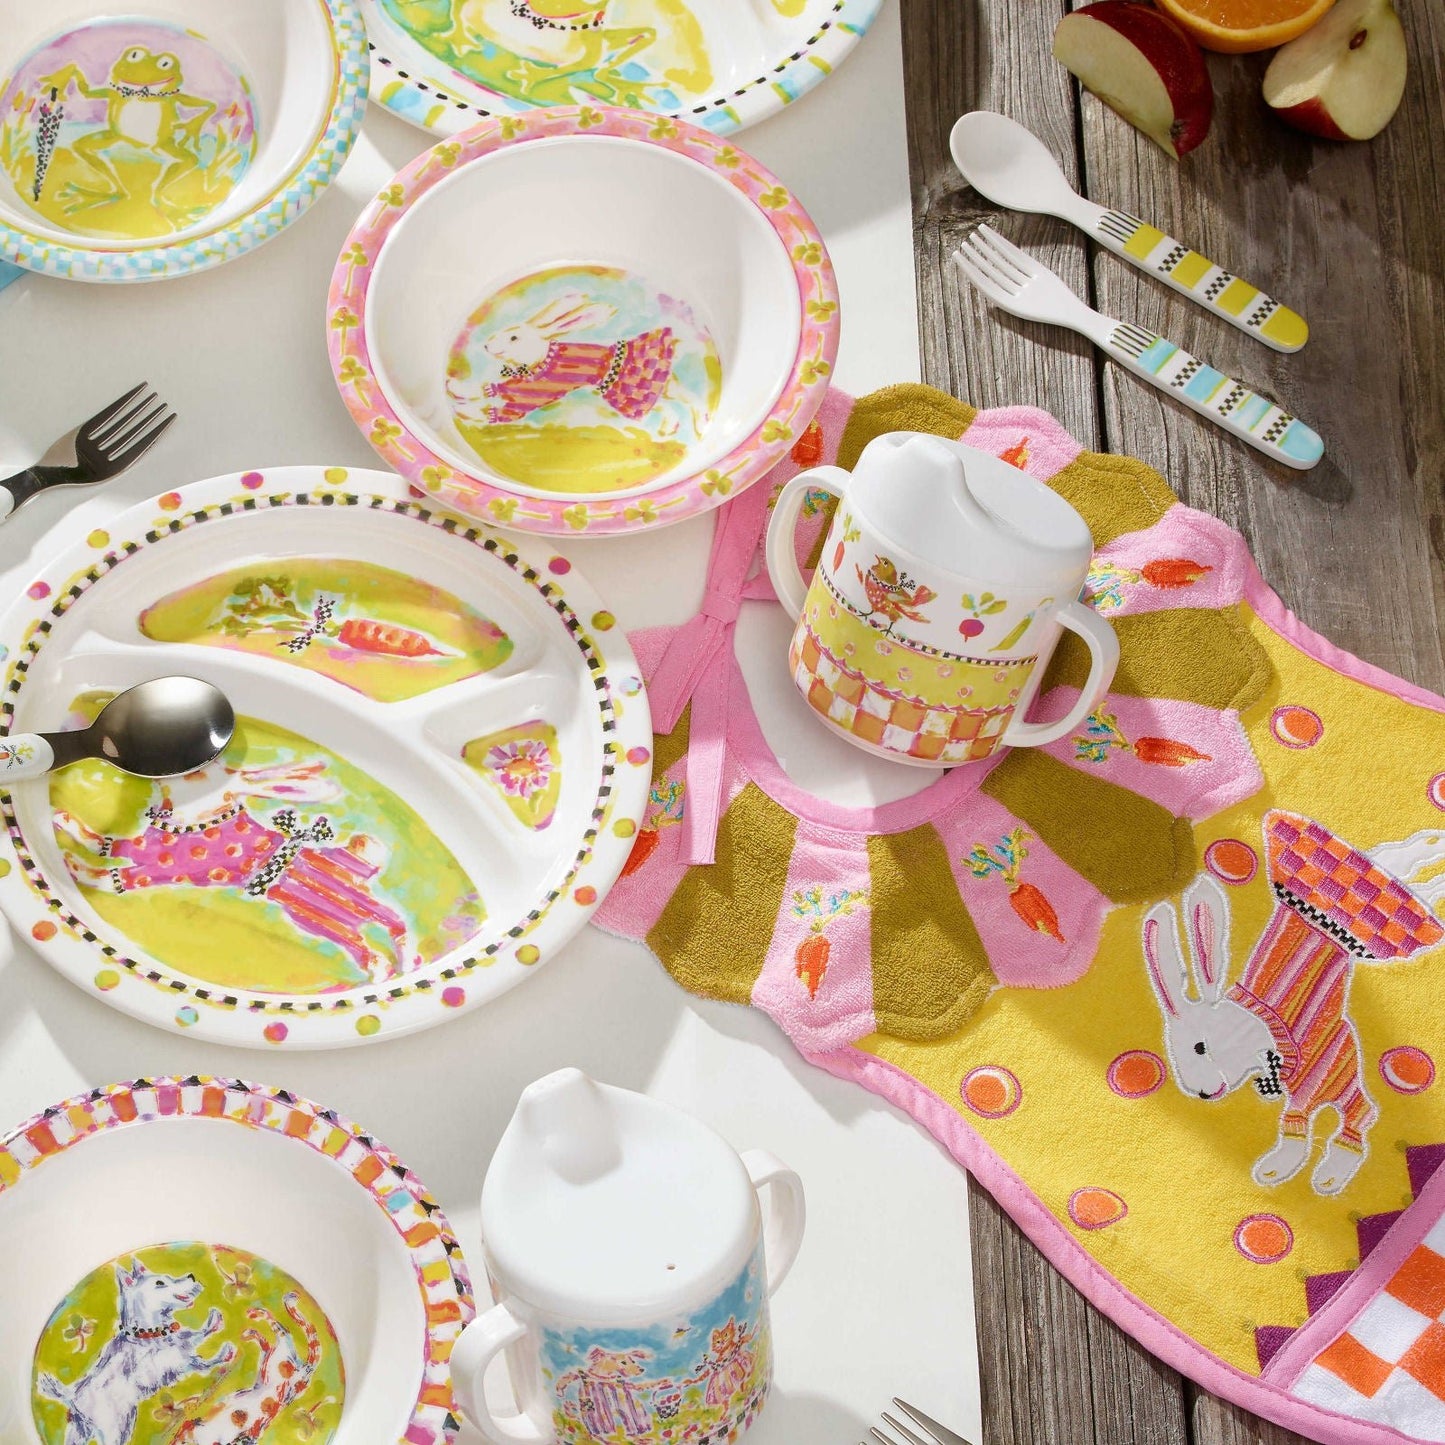 Toddler's Bunny Dinnerware Set by Mackenzie-Childs - |VESIMI Design| Luxury and Rustic bathrooms online